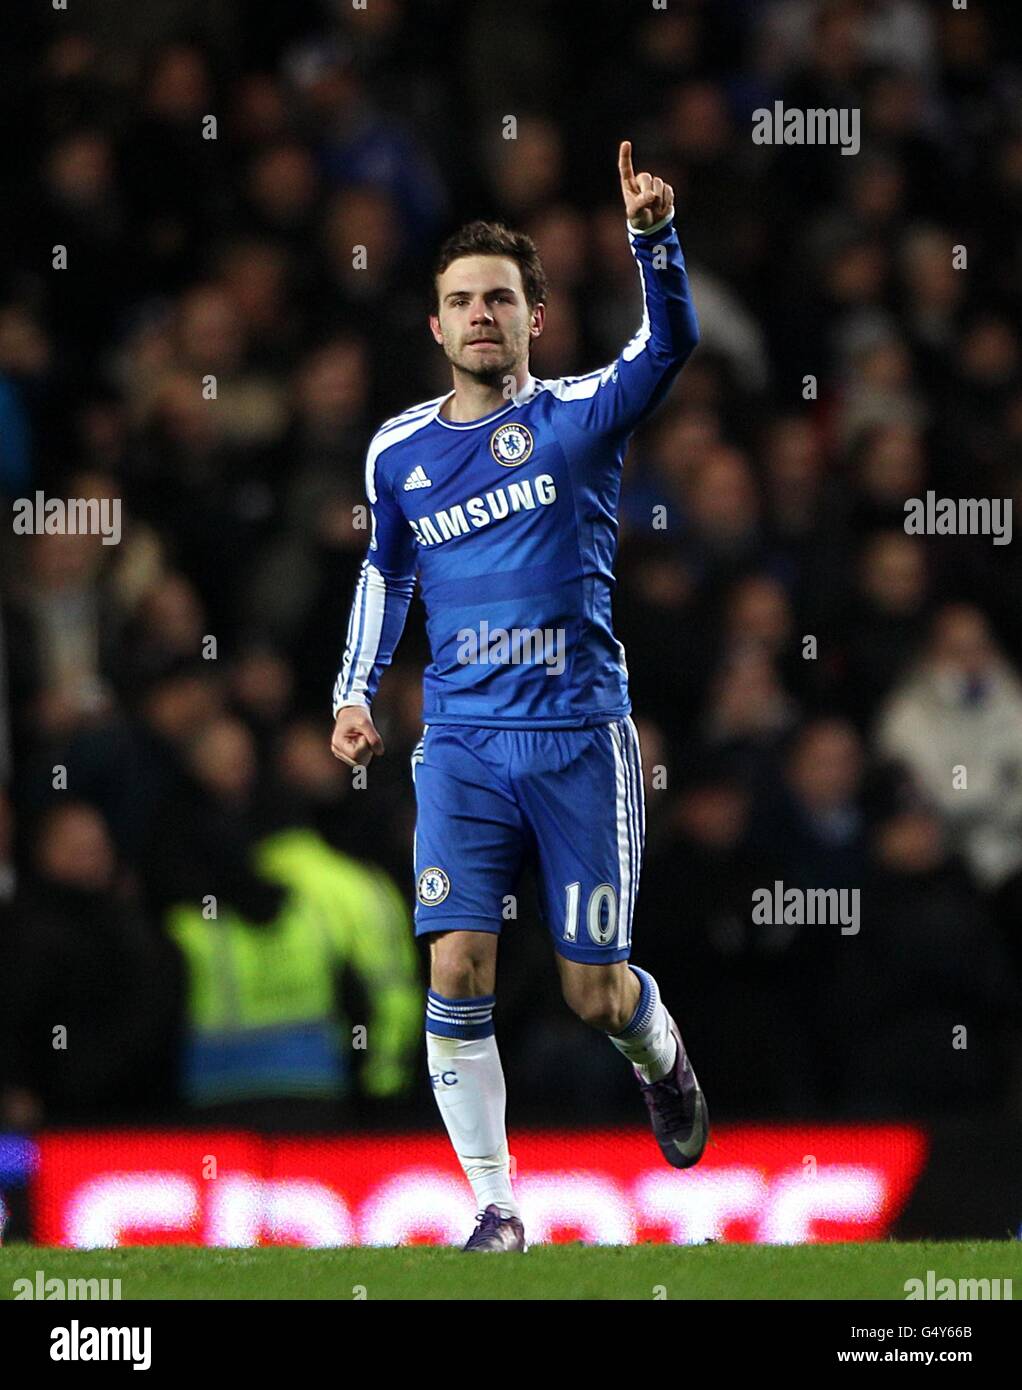 Soccer - Barclays Premier League - Chelsea v Manchester United - Stamford Bridge. Chelsea's Juan Mata celebrates after scoring his side's second goal of the game Stock Photo